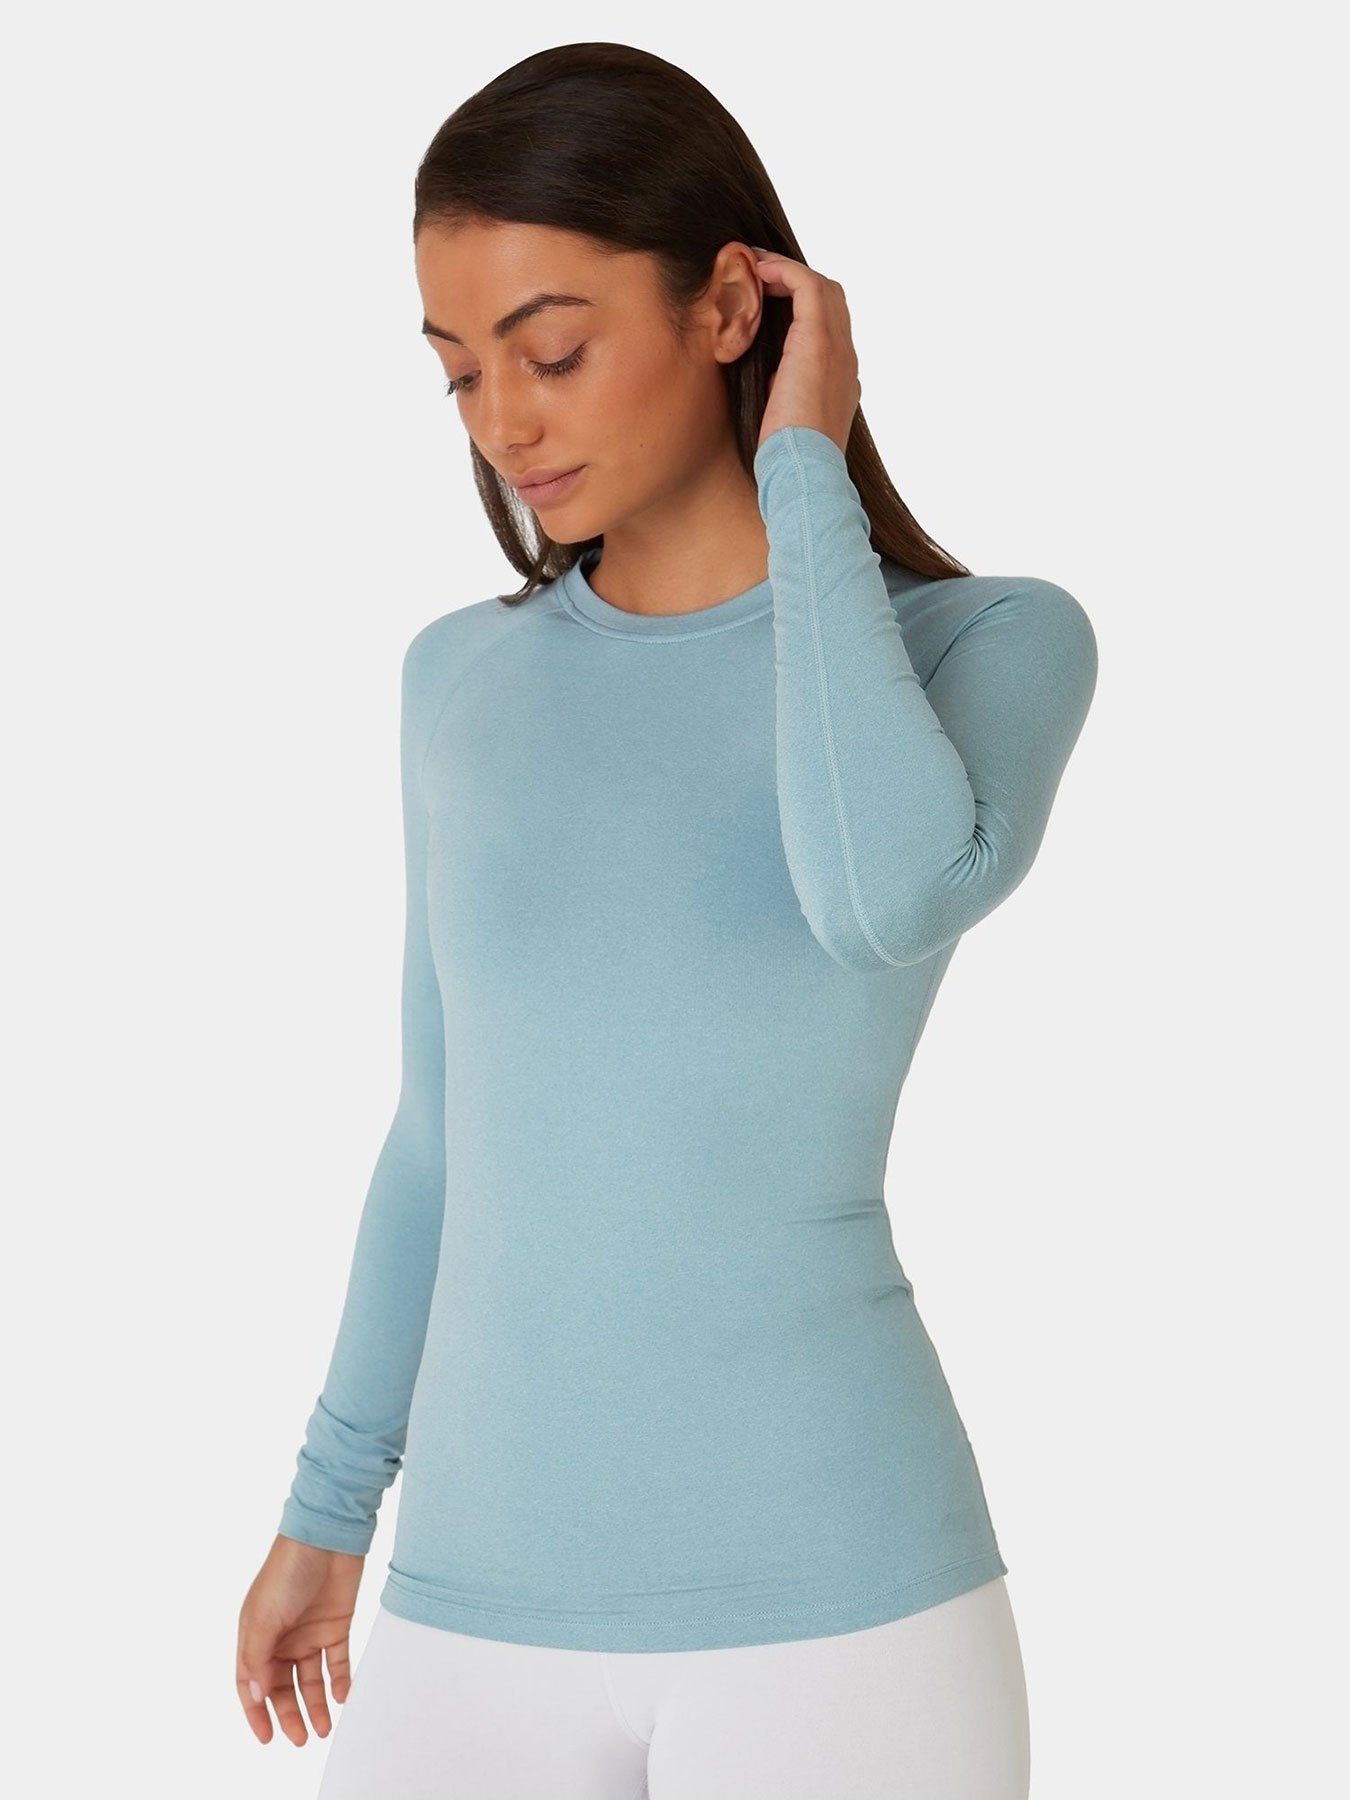 SuperThermal Long Sleeve Top for Women